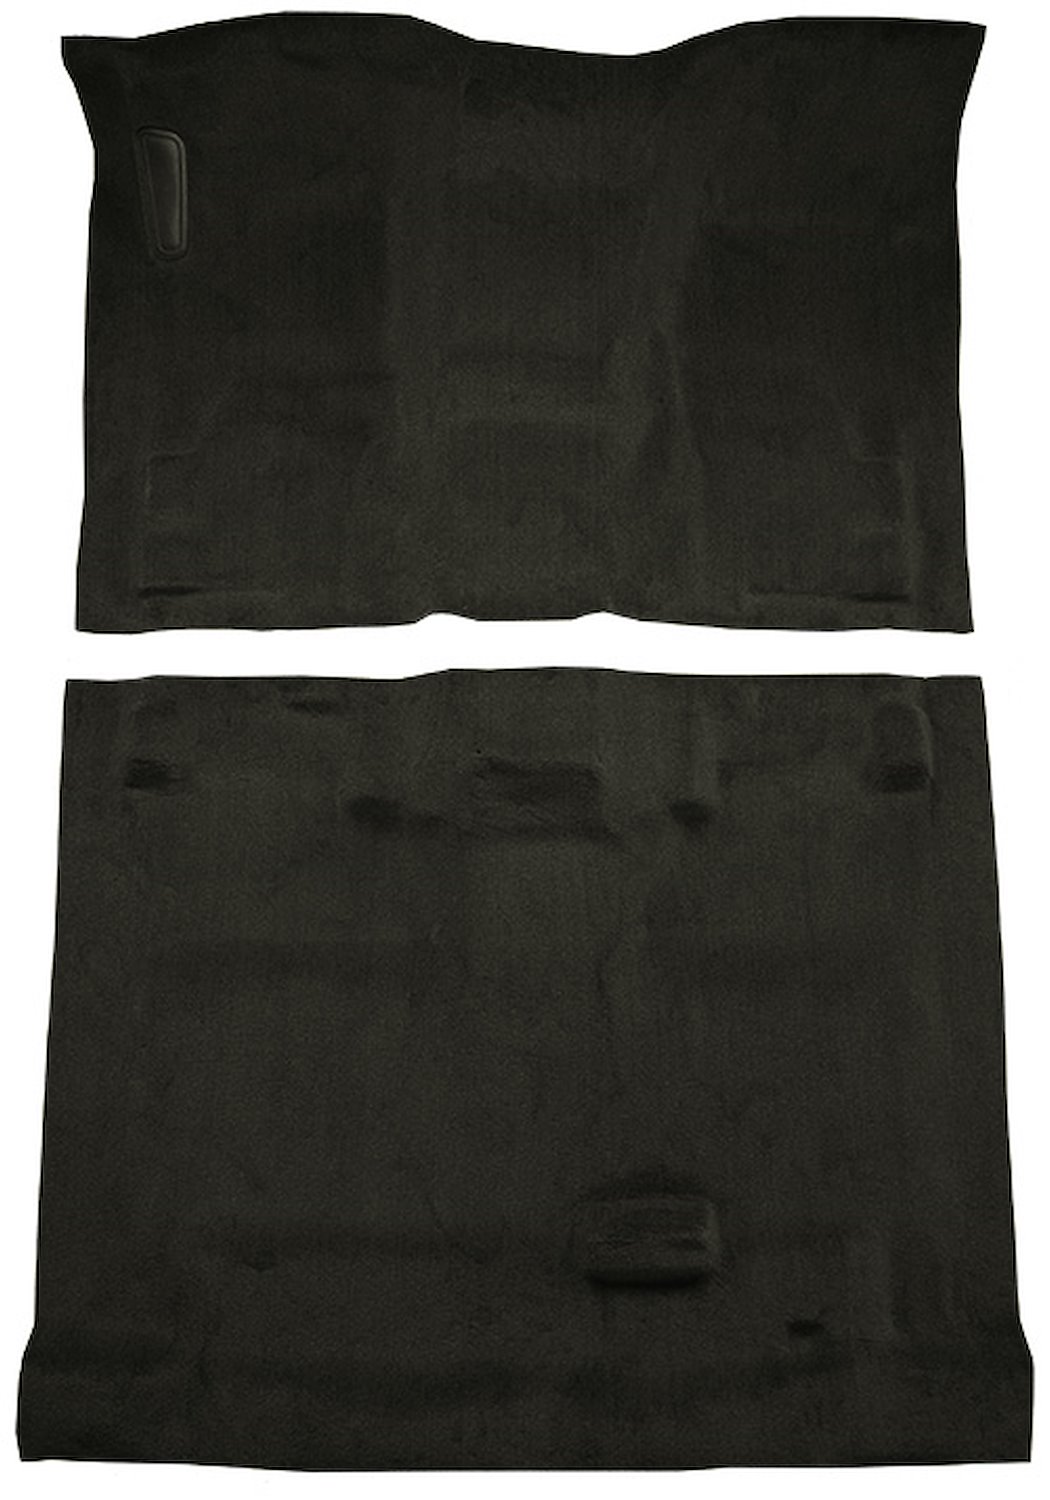 Molded Cut Pile Carpet for 1987 Chevrolet/GMC R Series Truck [Mass Backing, 1-Piece, Charcoal]